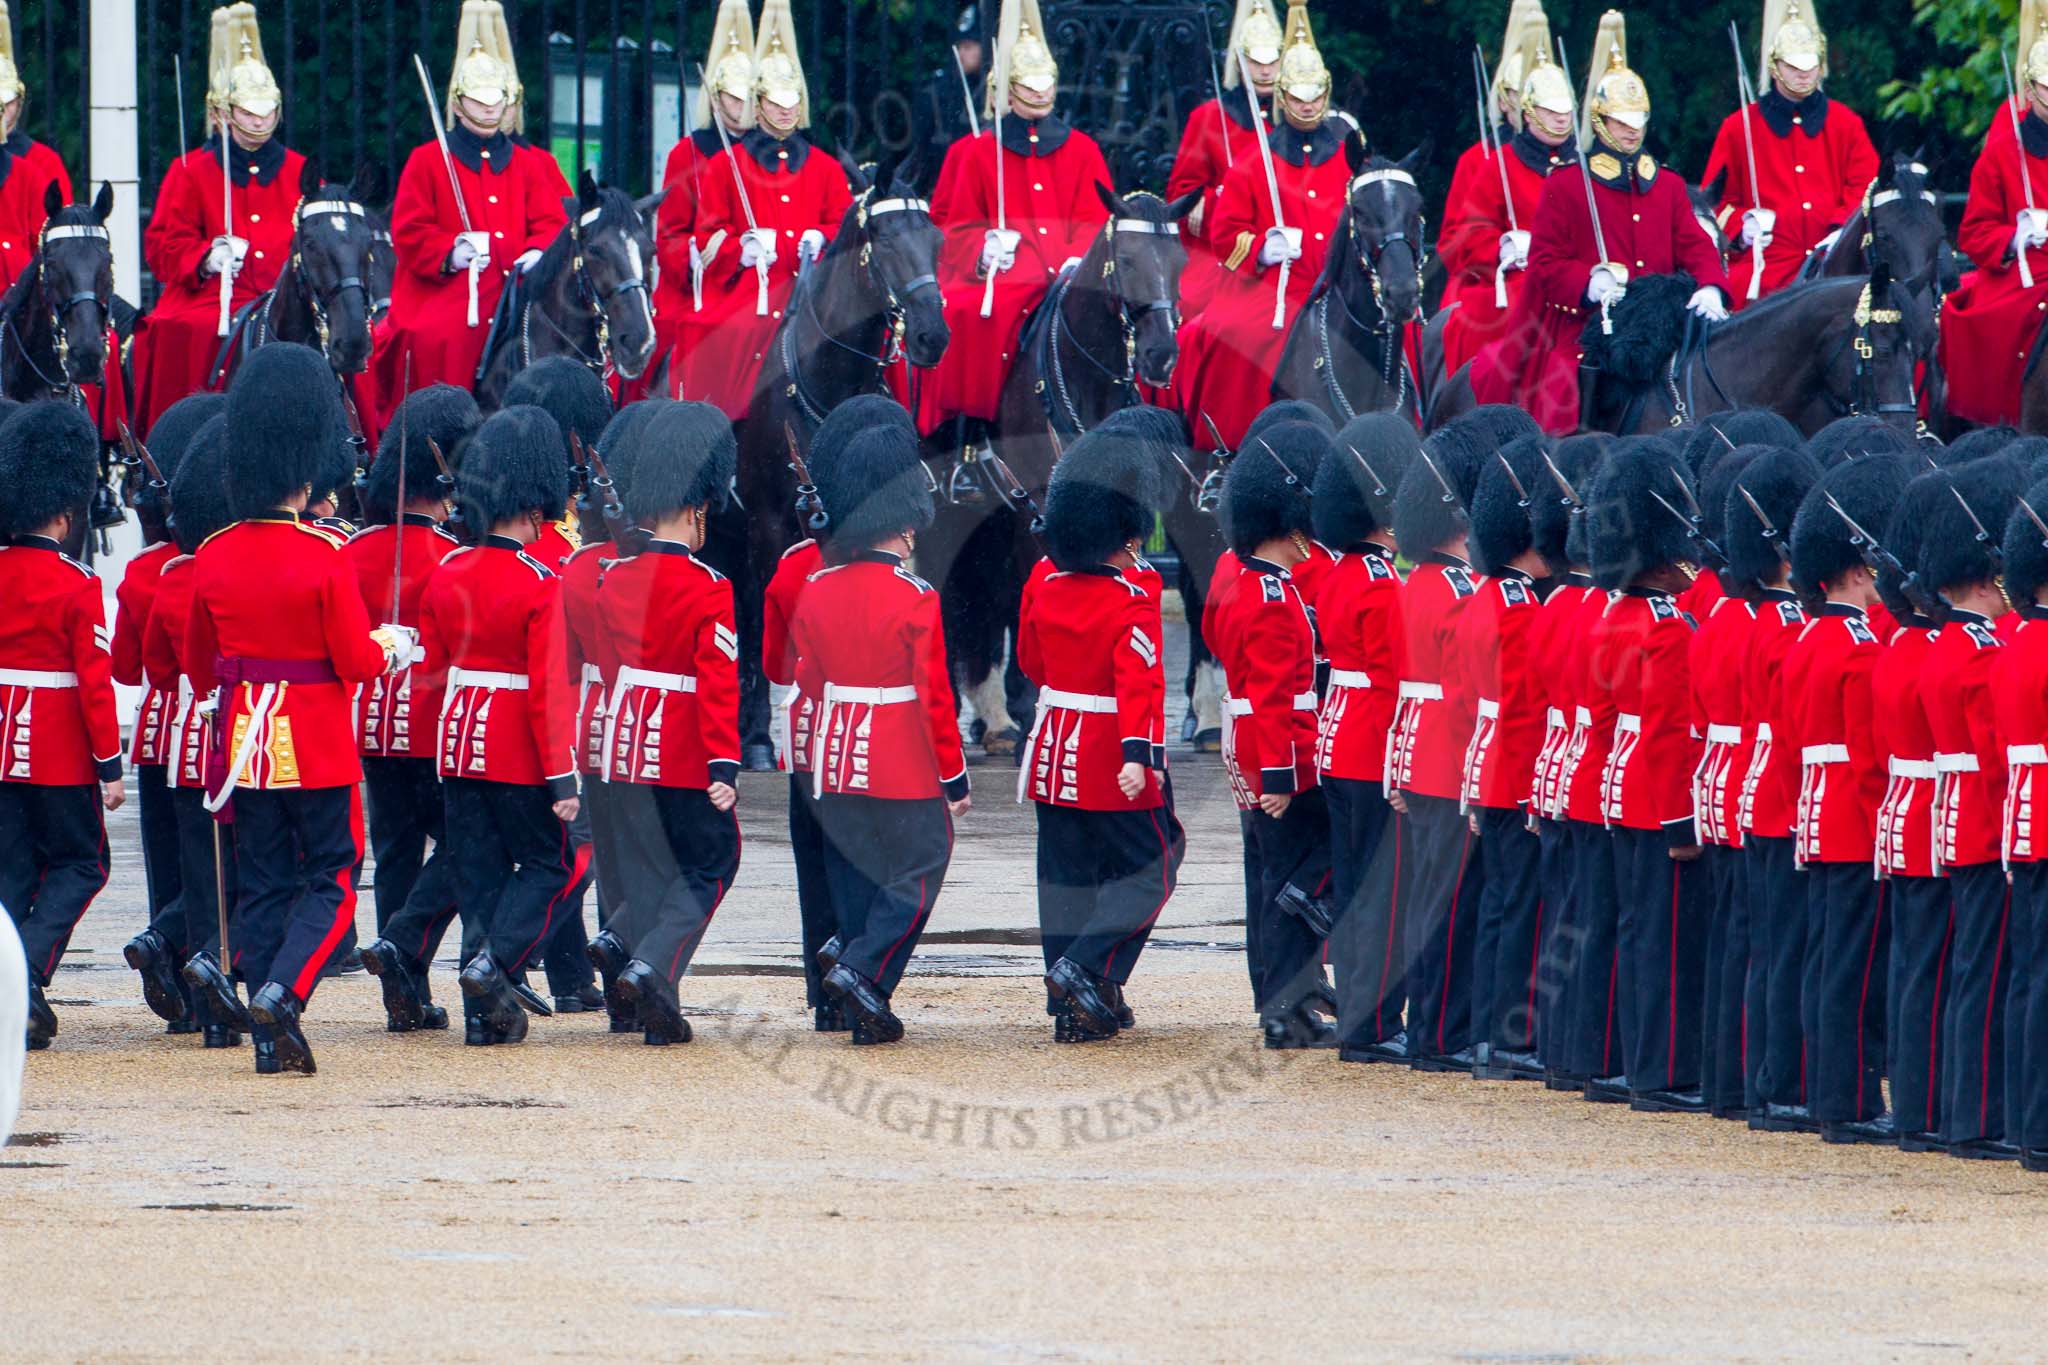 The Colonel's Review 2014.
Horse Guards Parade, Westminster,
London,

United Kingdom,
on 07 June 2014 at 11:28, image #457